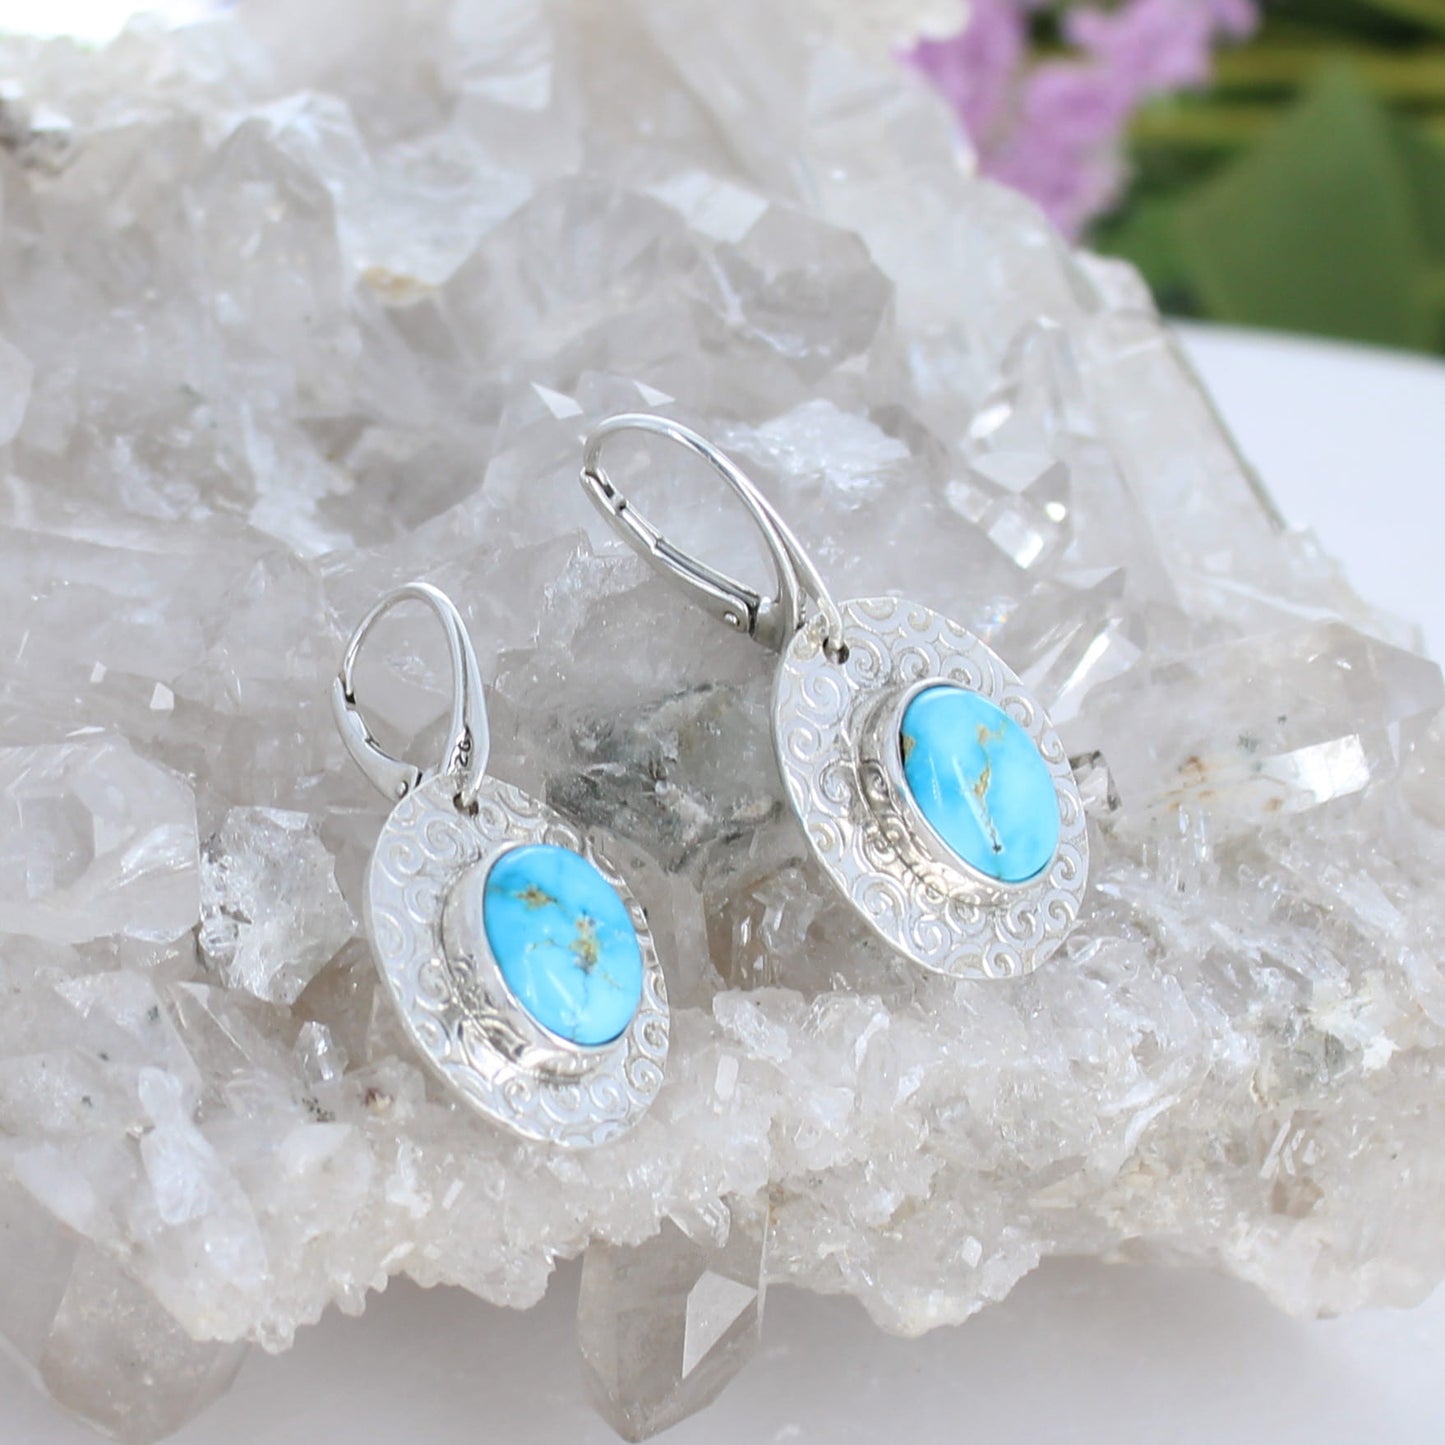 Bright Blue South Hill Turquoise Earrings Sterling Silver